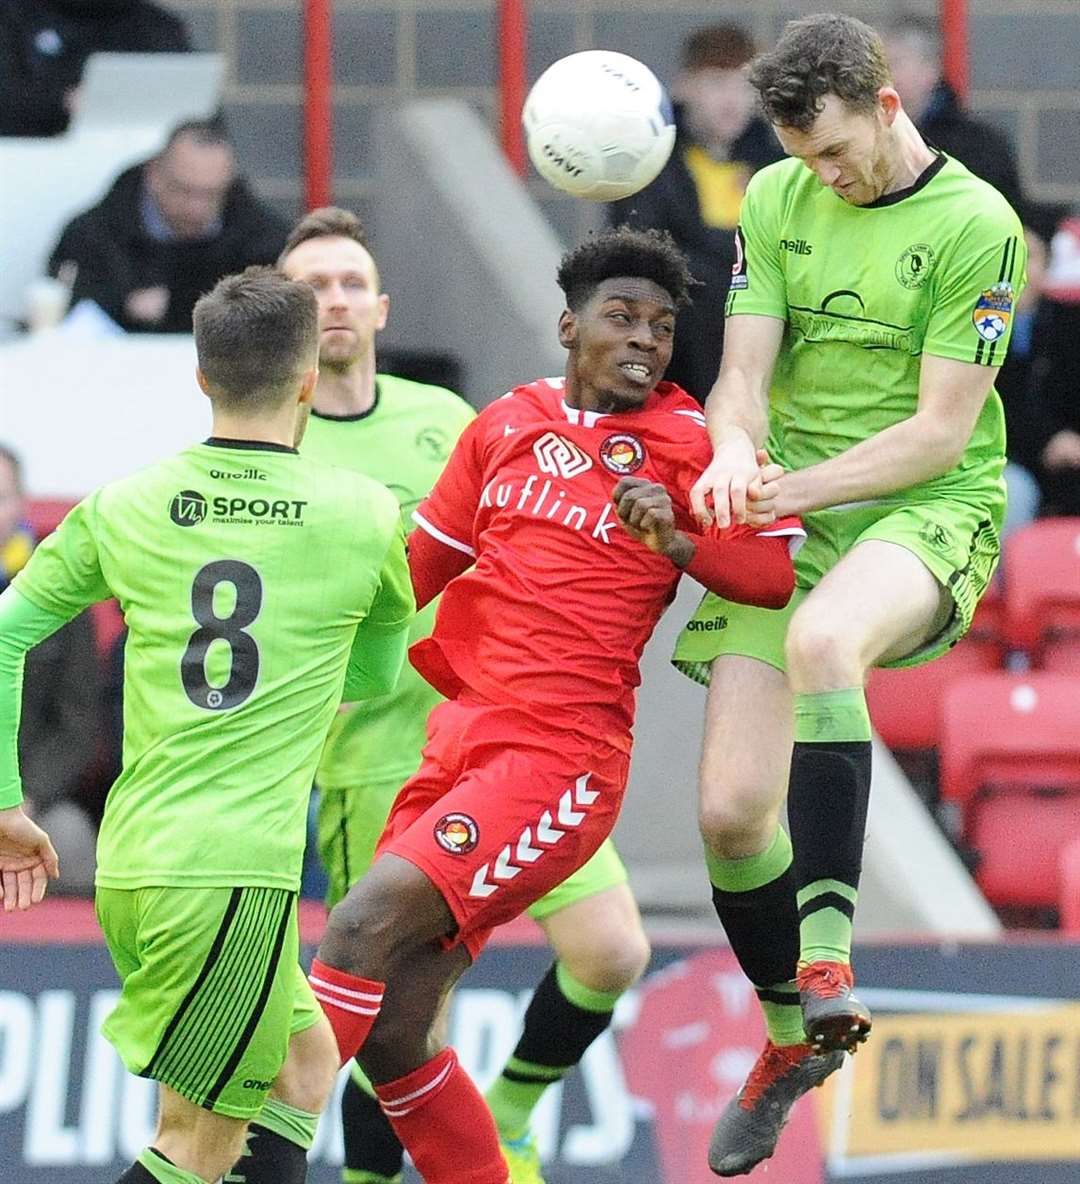 Jermaine McGlashan leaps into action for Ebbsfleet against King's Lynn in last weekend's FA Trophy tie Picture: Tim Smith